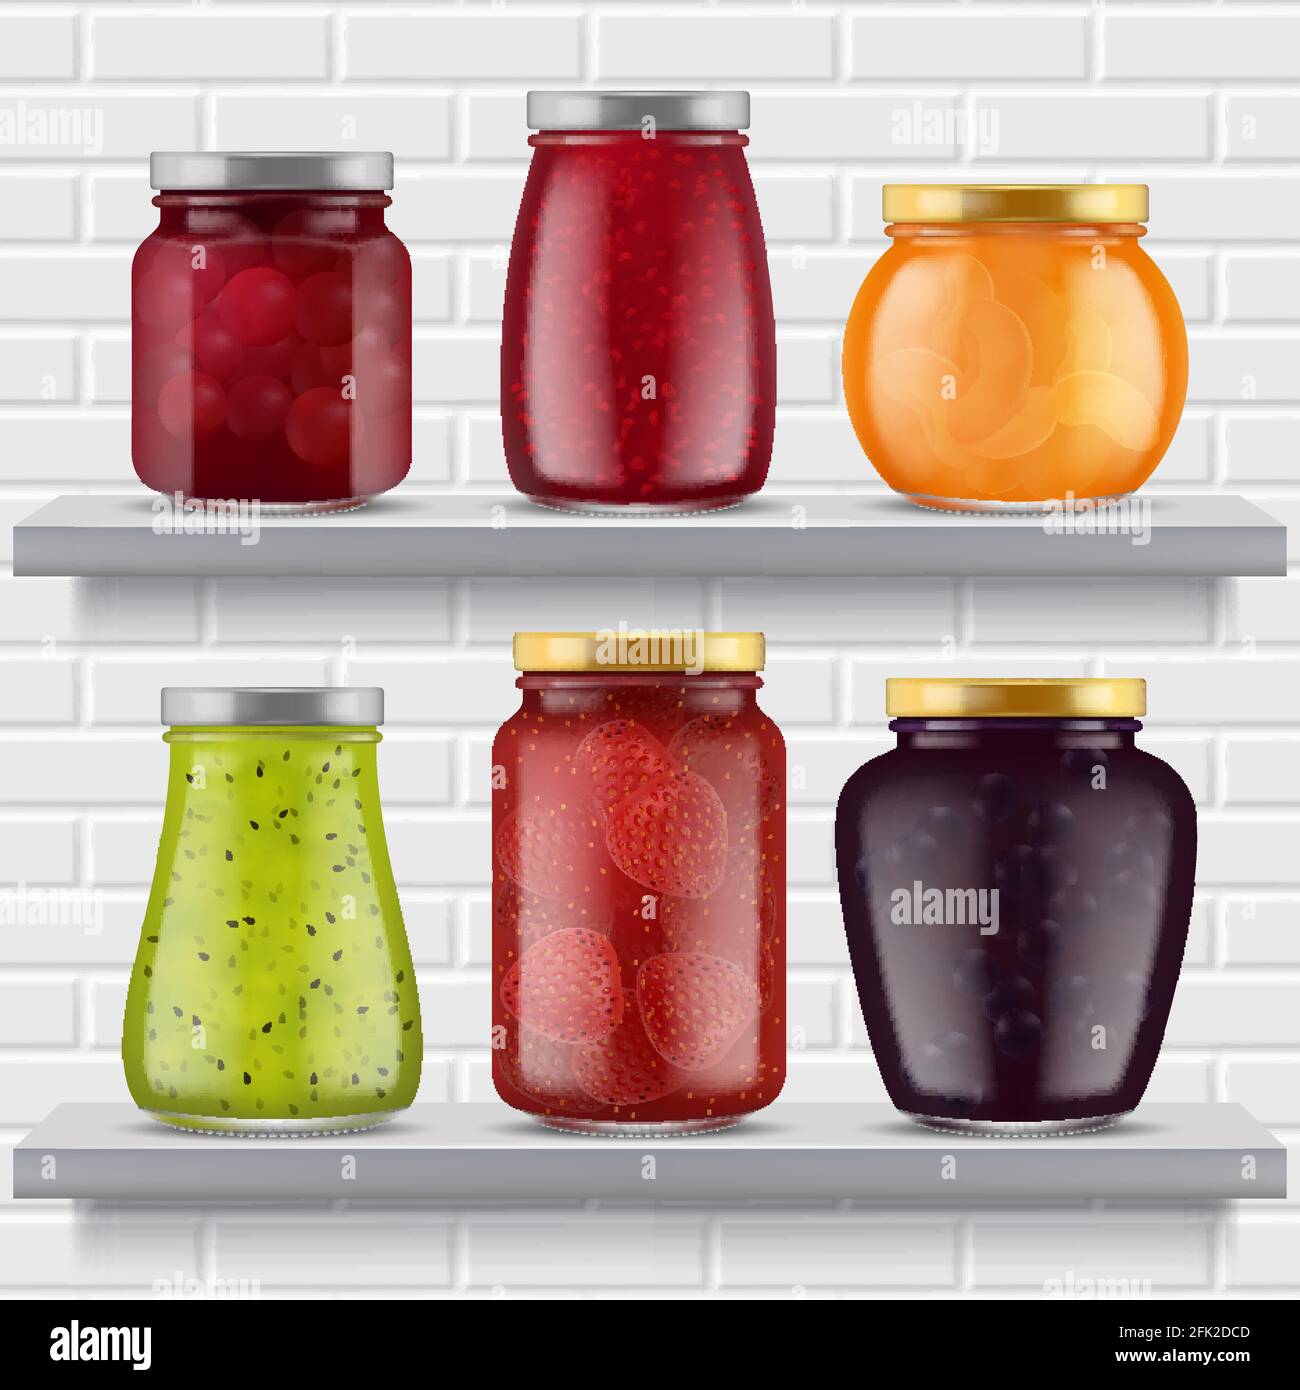 Jam food shelves. Fruits marmalade delicious products strawberry peaches apricots in glass jar realistic jam illustrations Stock Vector